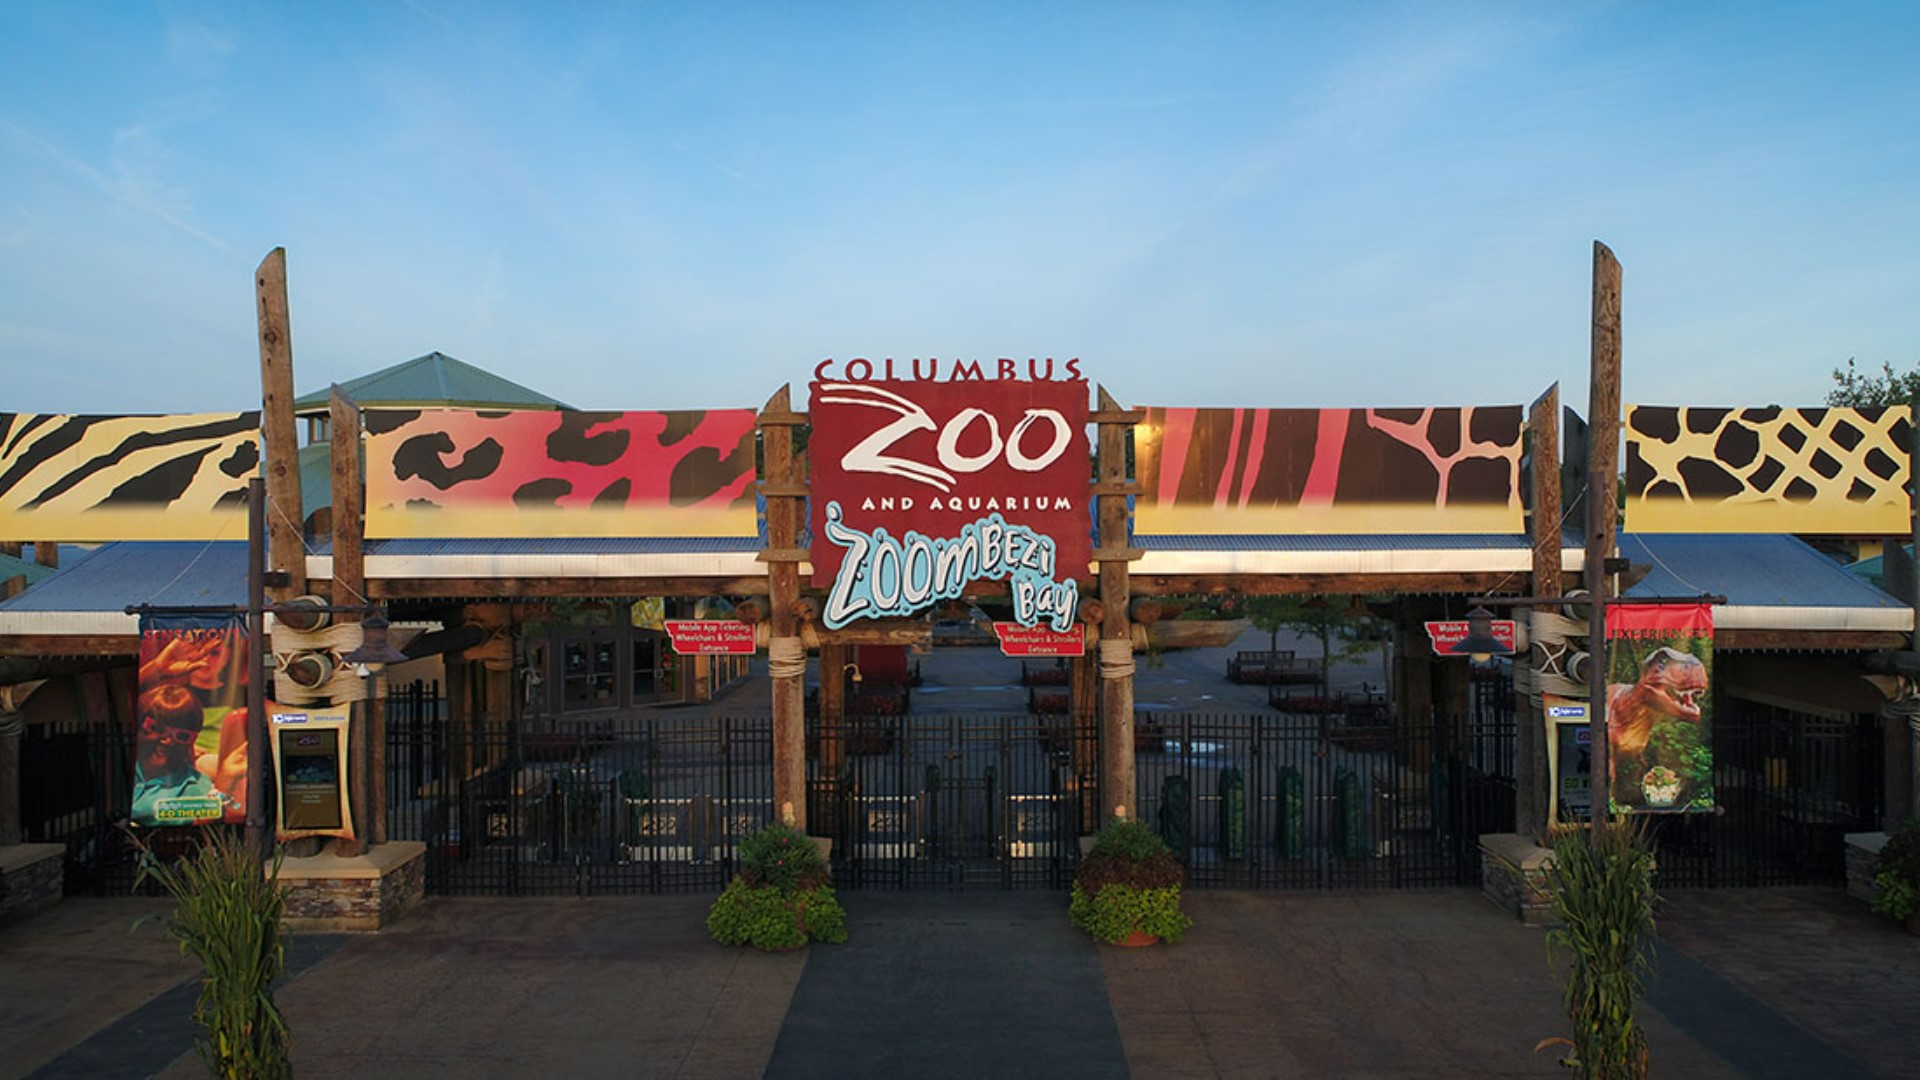 The accreditation was removed in 2021 over an investigation into misuse of funds at the zoo and reports of intentional animal transfers for entertainment purposes.